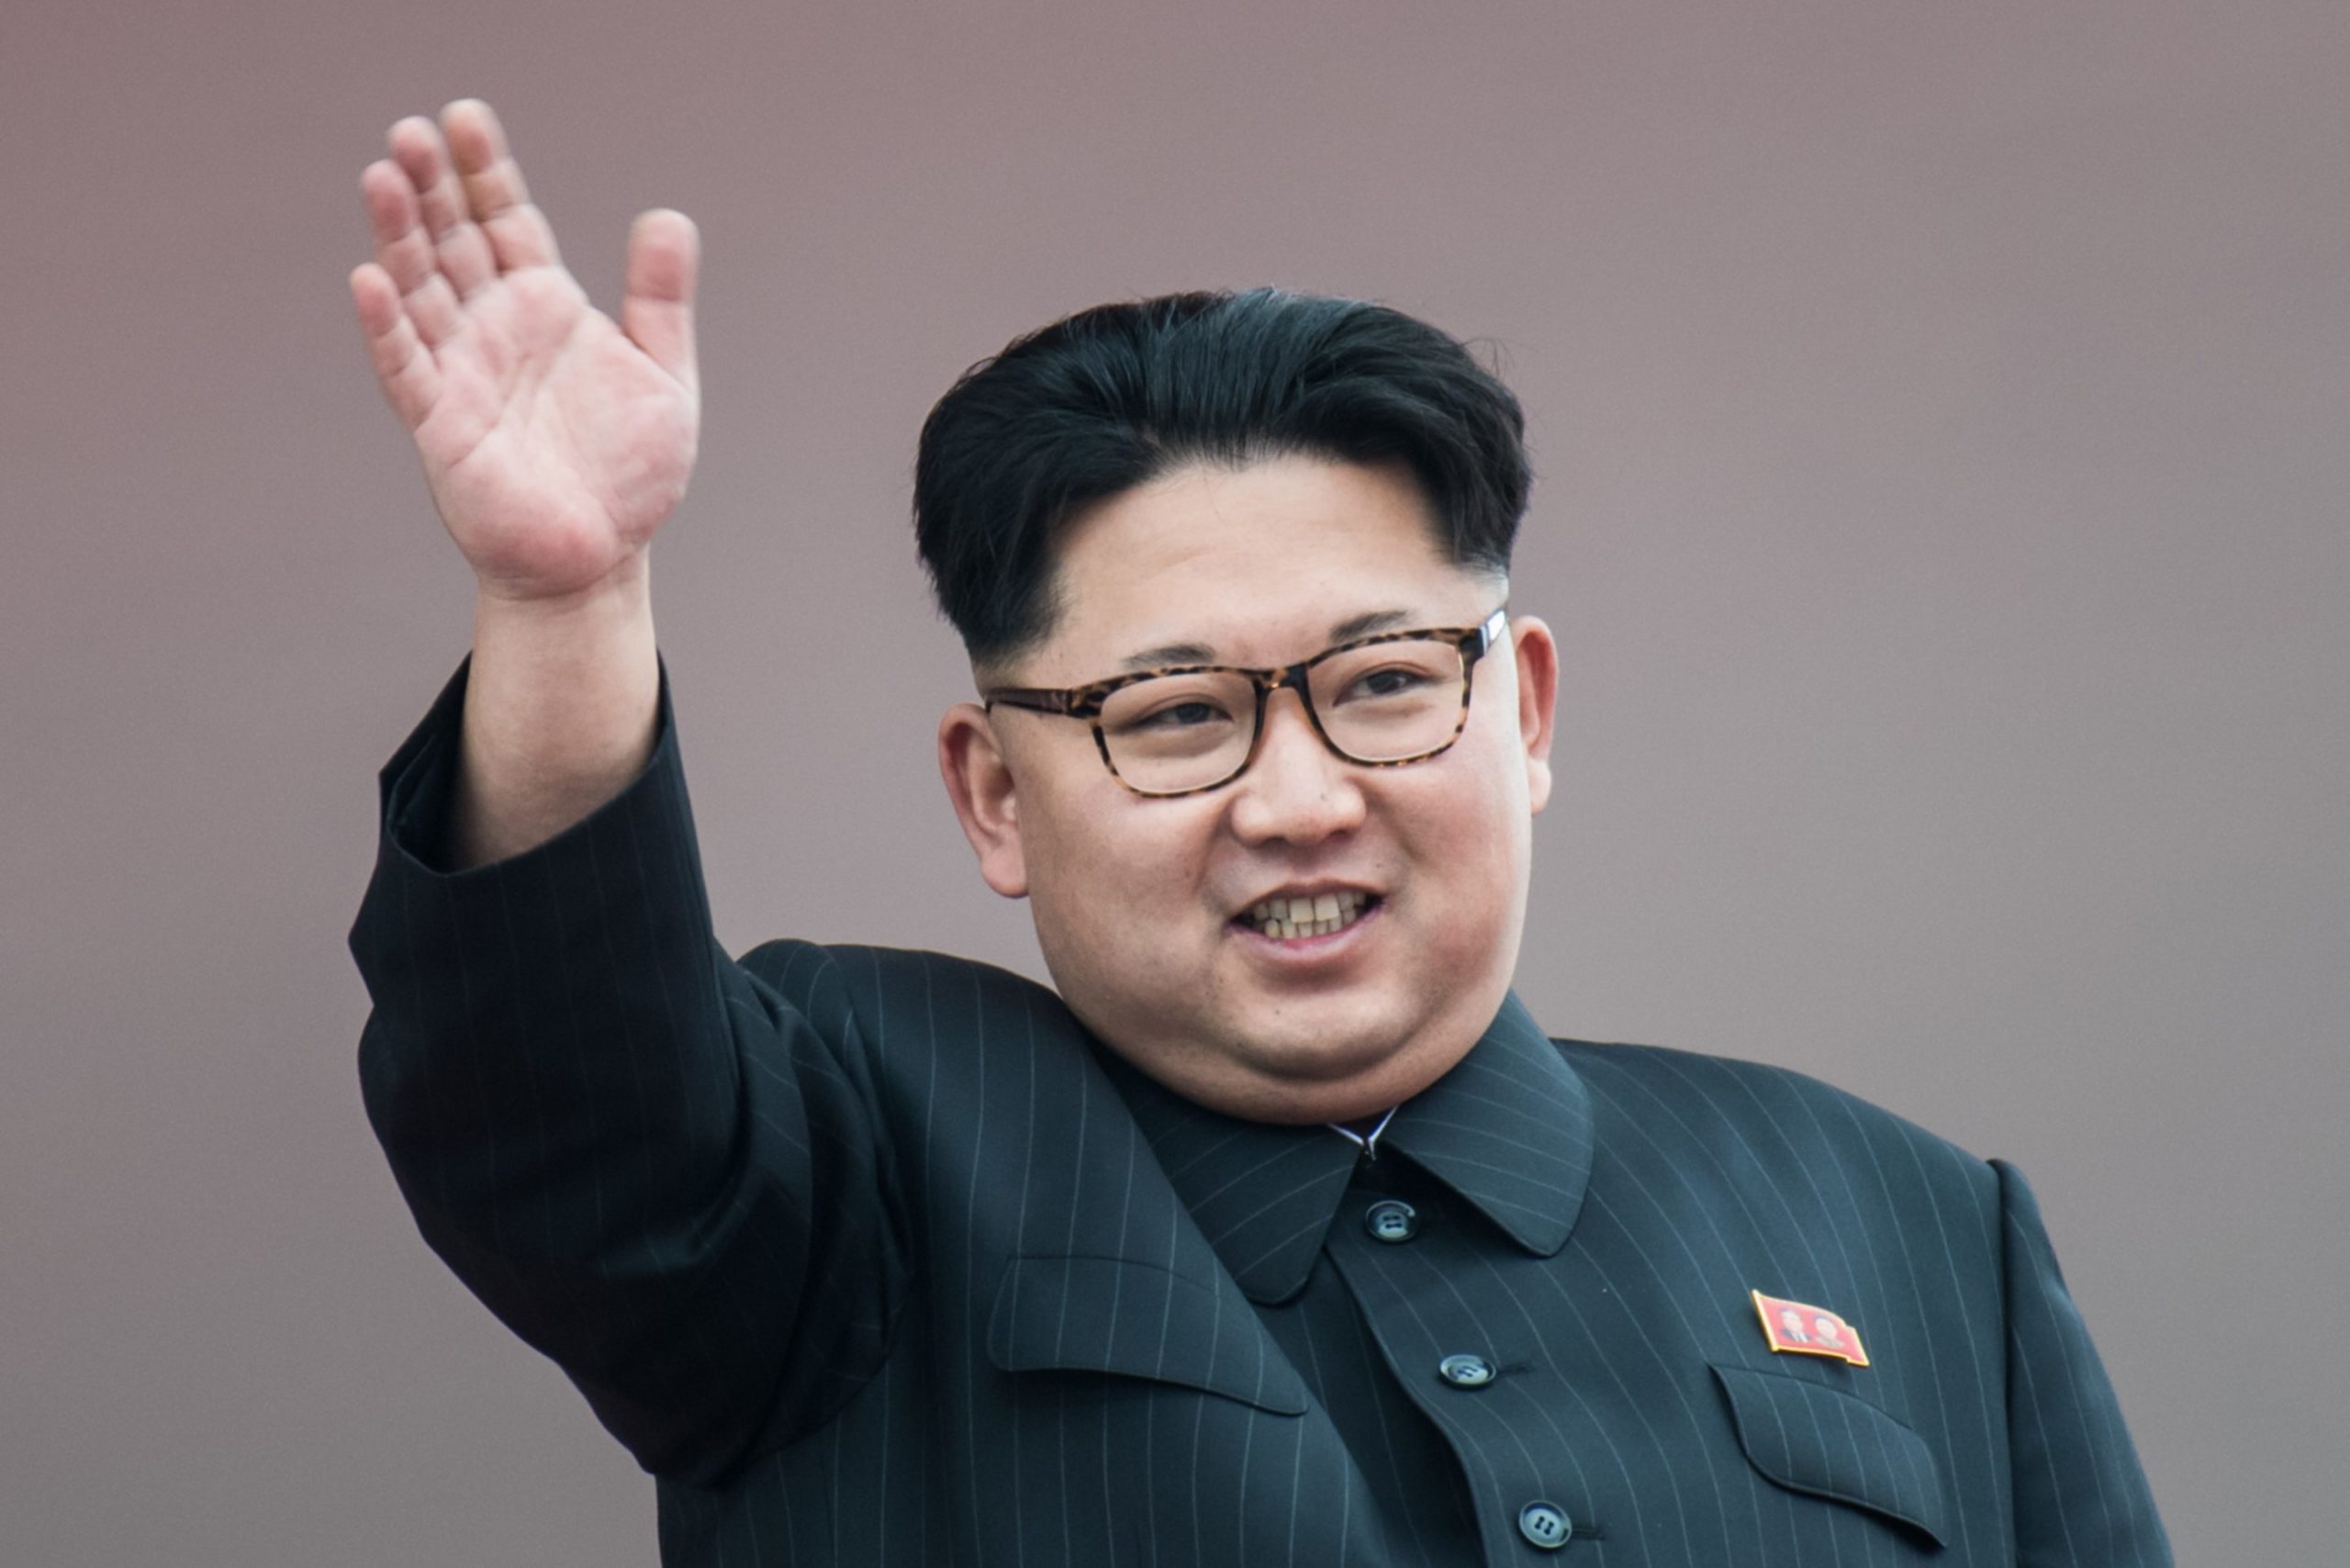 Now we know who's behind one of the largest crypto heists in history: North Korea